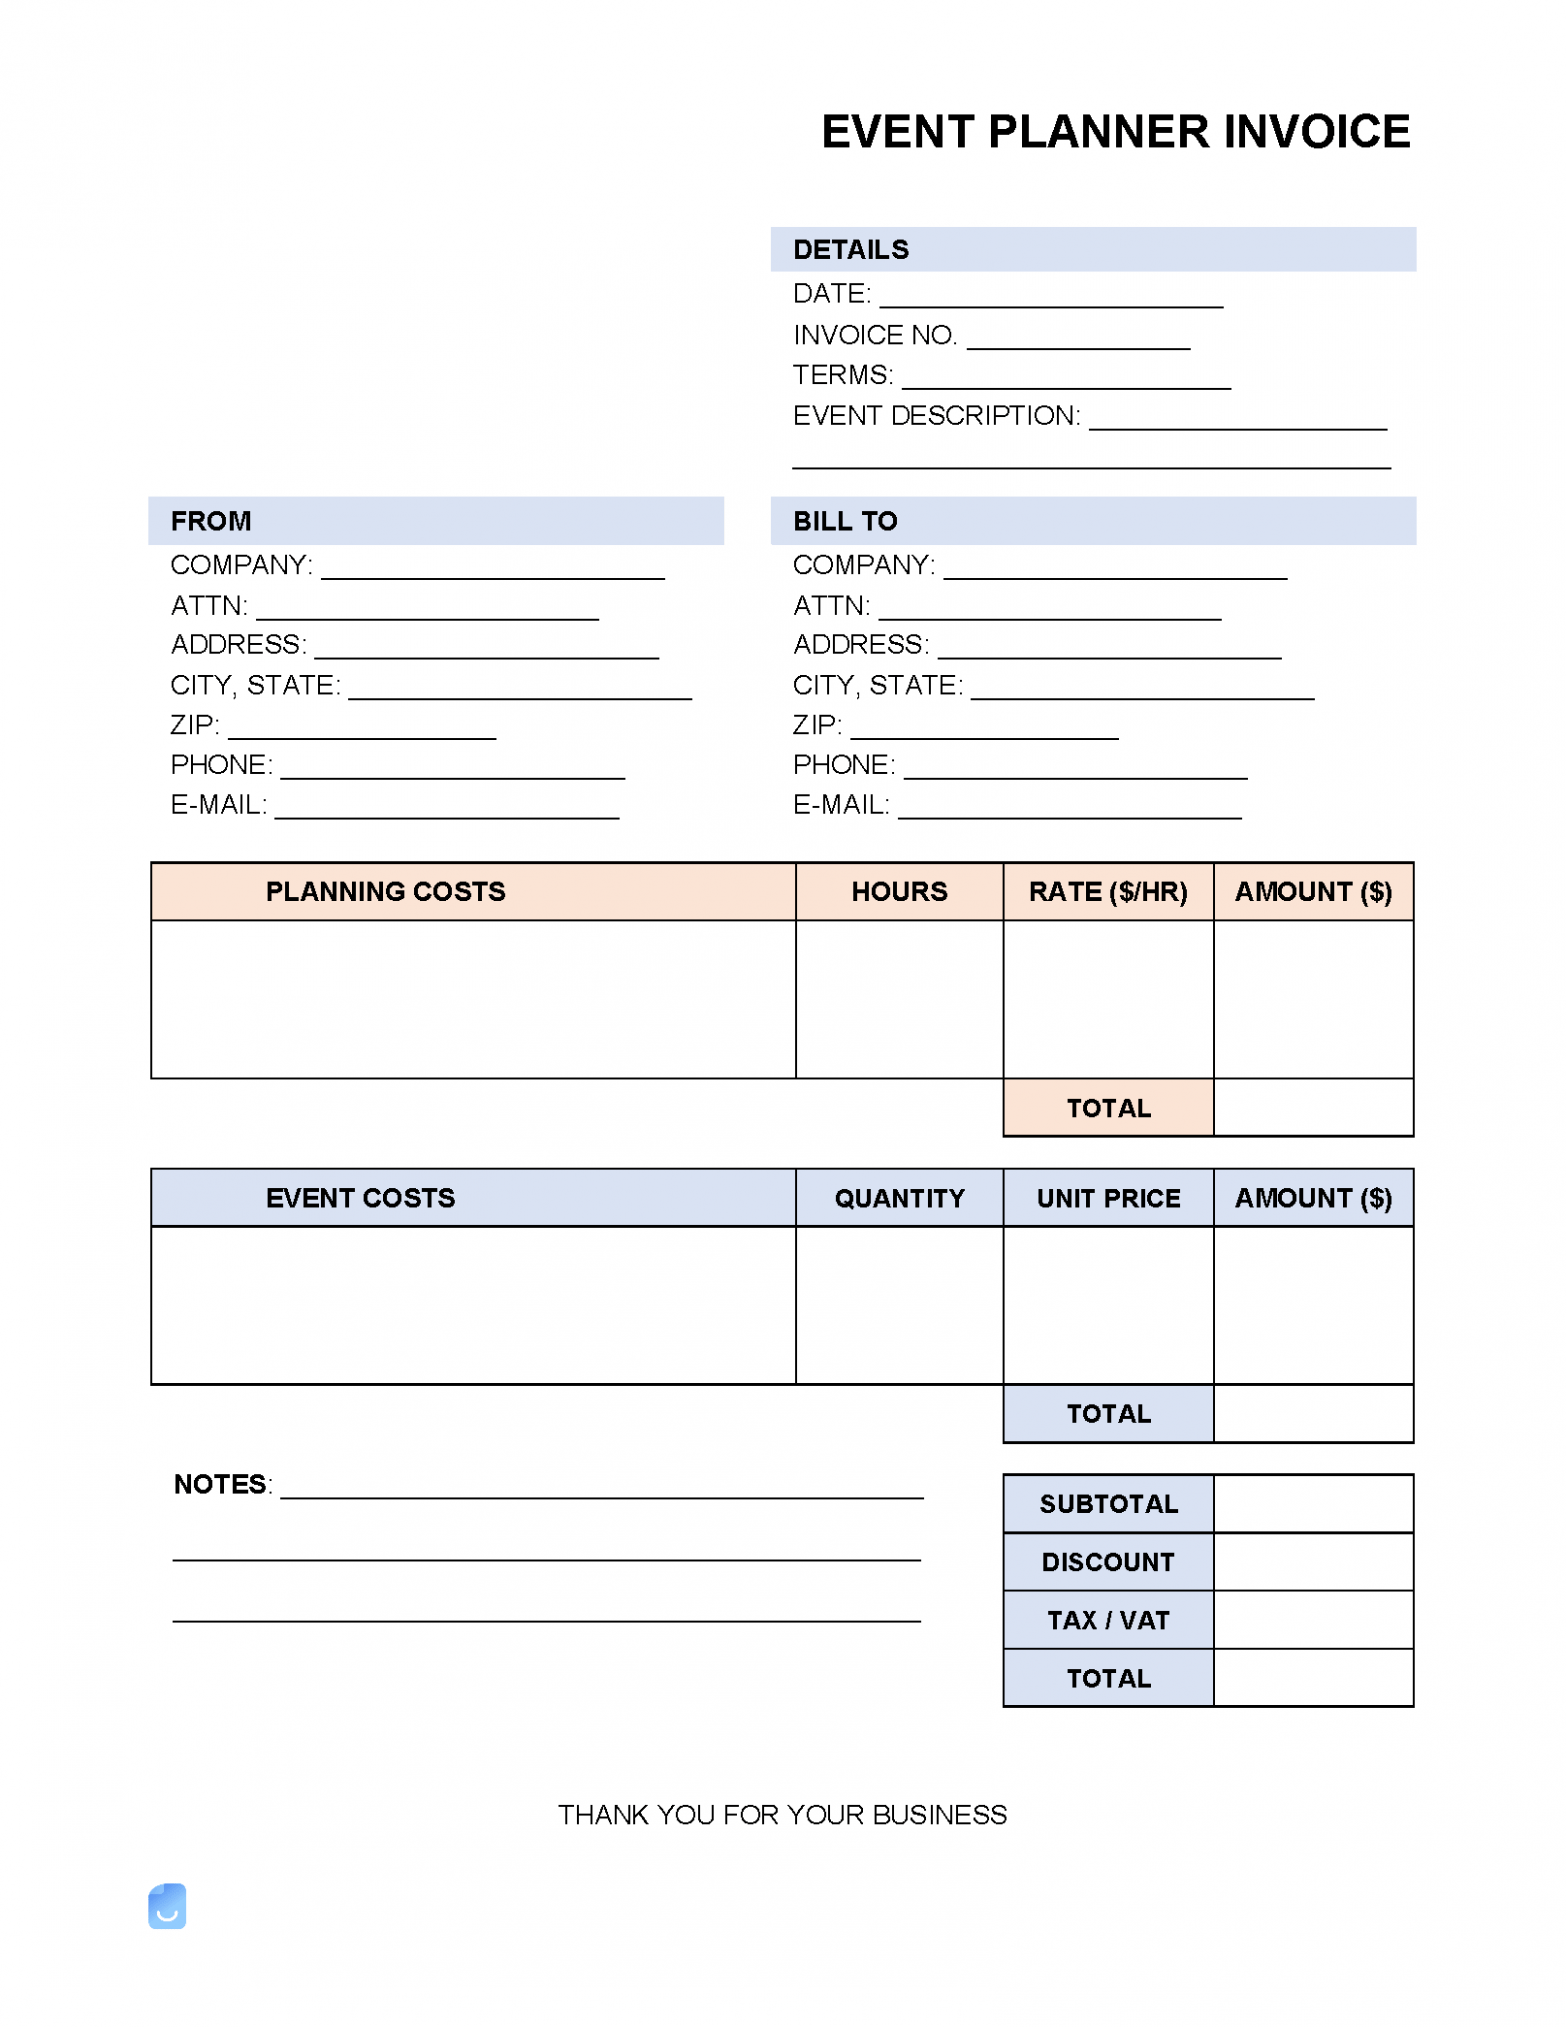 Editable Event Planning Invoice Template Excel